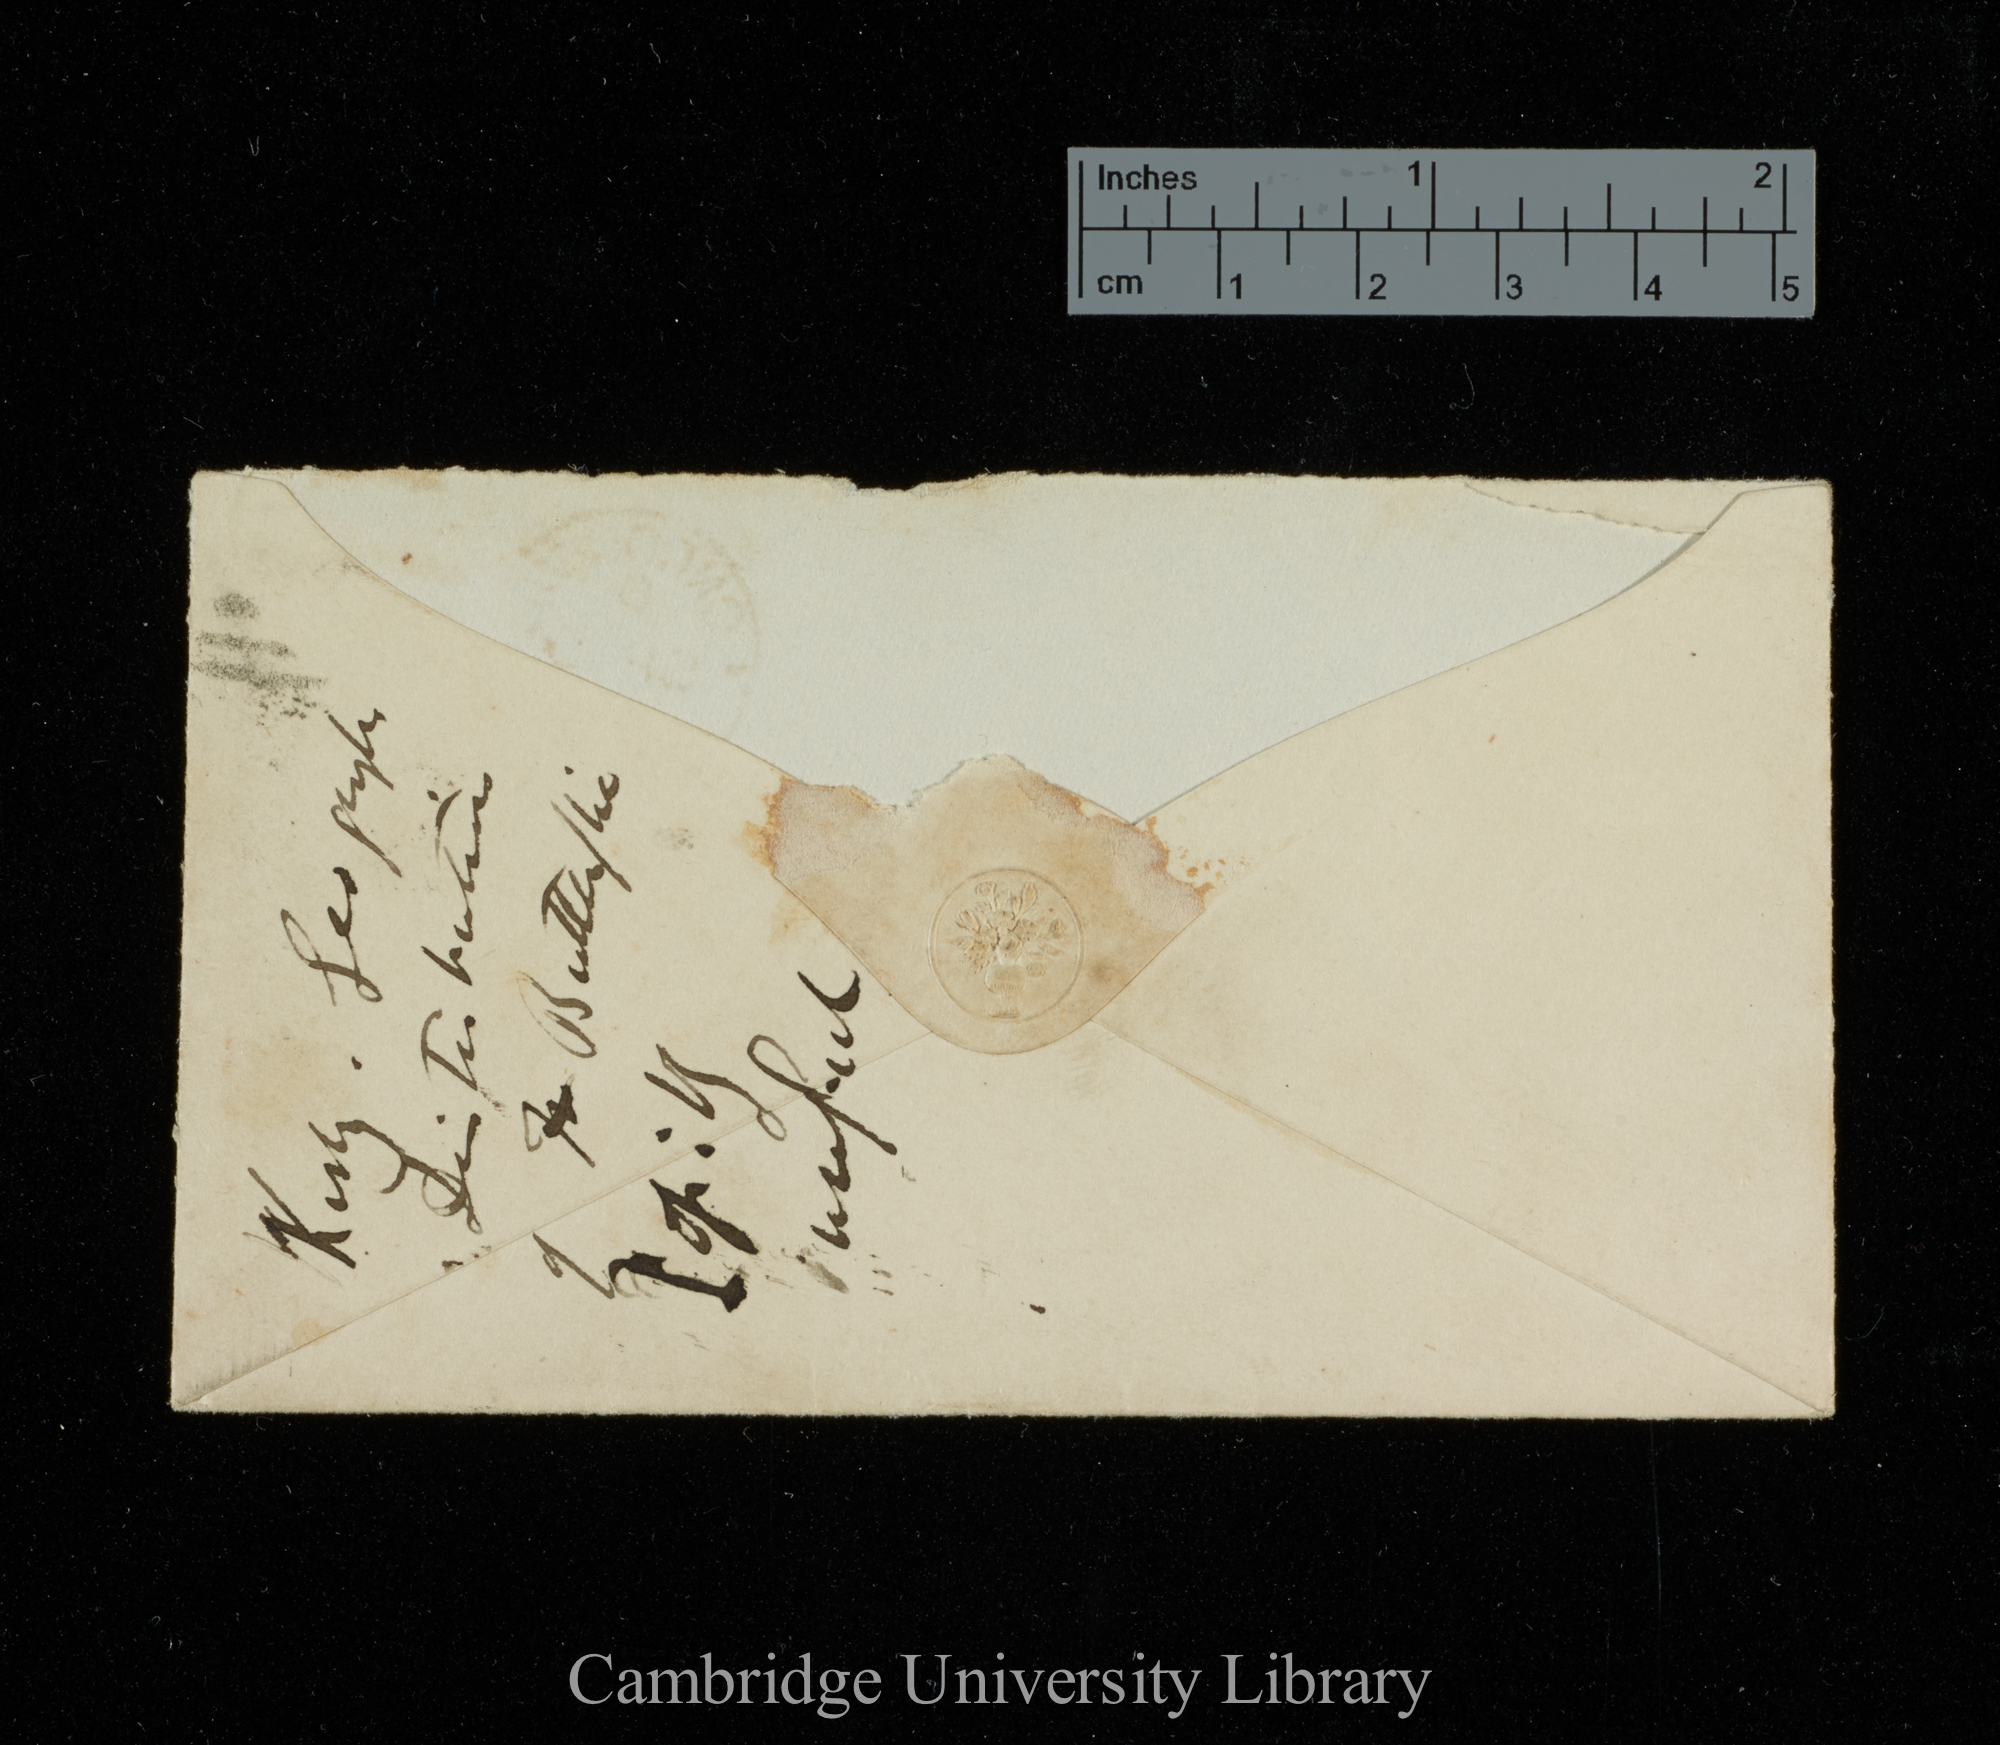 William Forsell Kirby to Charles Robert Darwin [envelope]